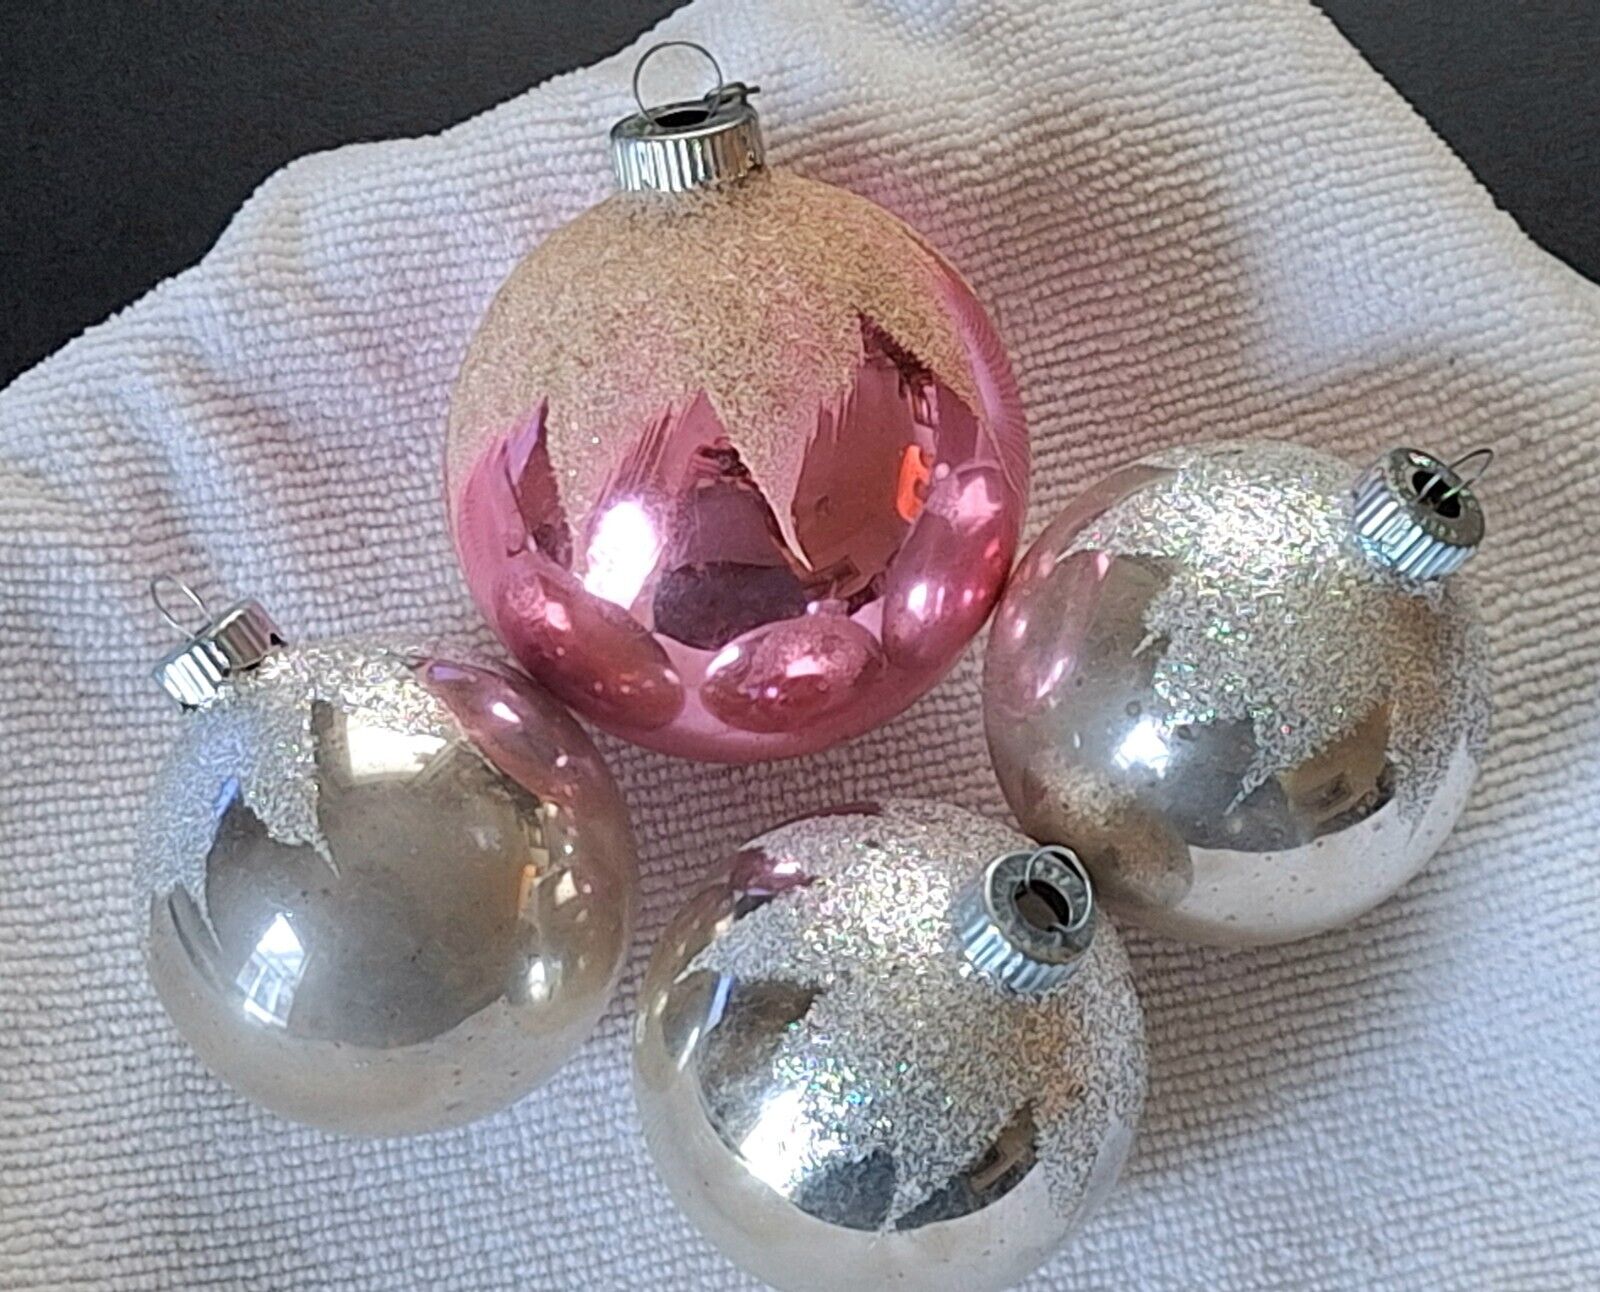 Vintage Glass Ornaments Shiny Brite Mica Snow Cap Lot of 4 Silver Pink